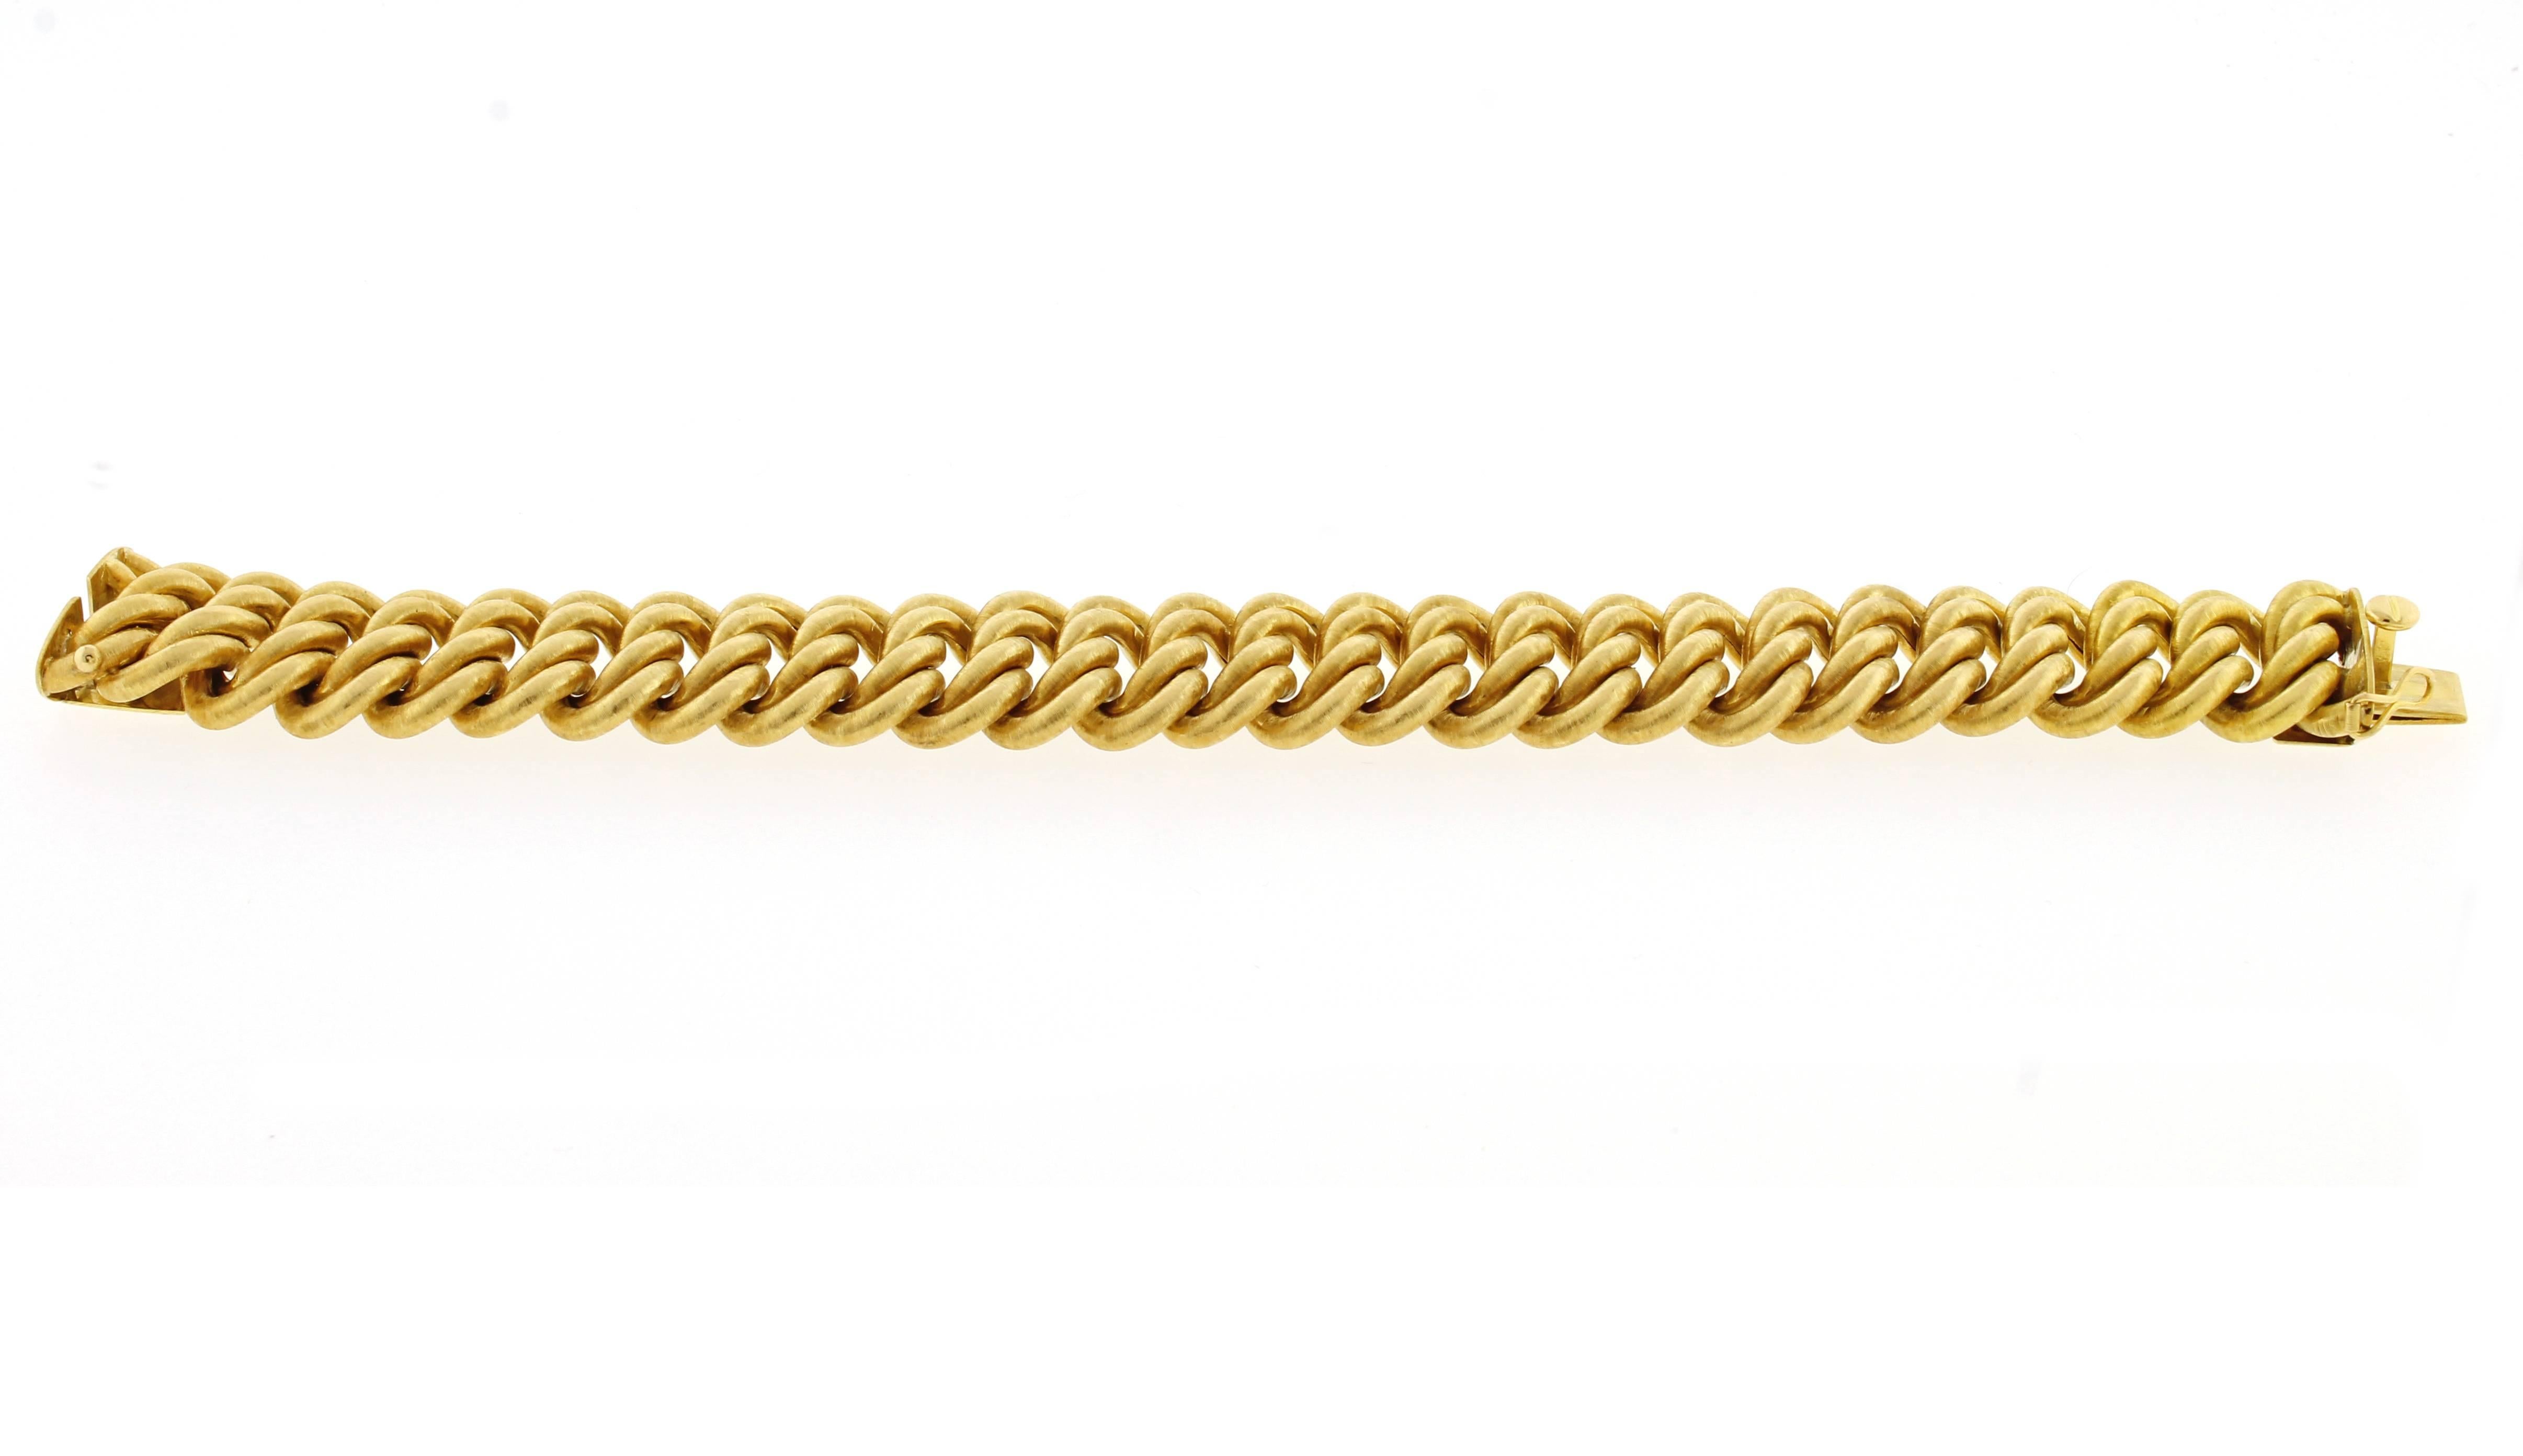 From Buccellati, a wide (7/8 of an inch) double link 18 karat gold bracelet. The soft oft matte finish typifies the craftsmanship and art of Buccellati. 8 inches. maybe shortened, 61.5 grams